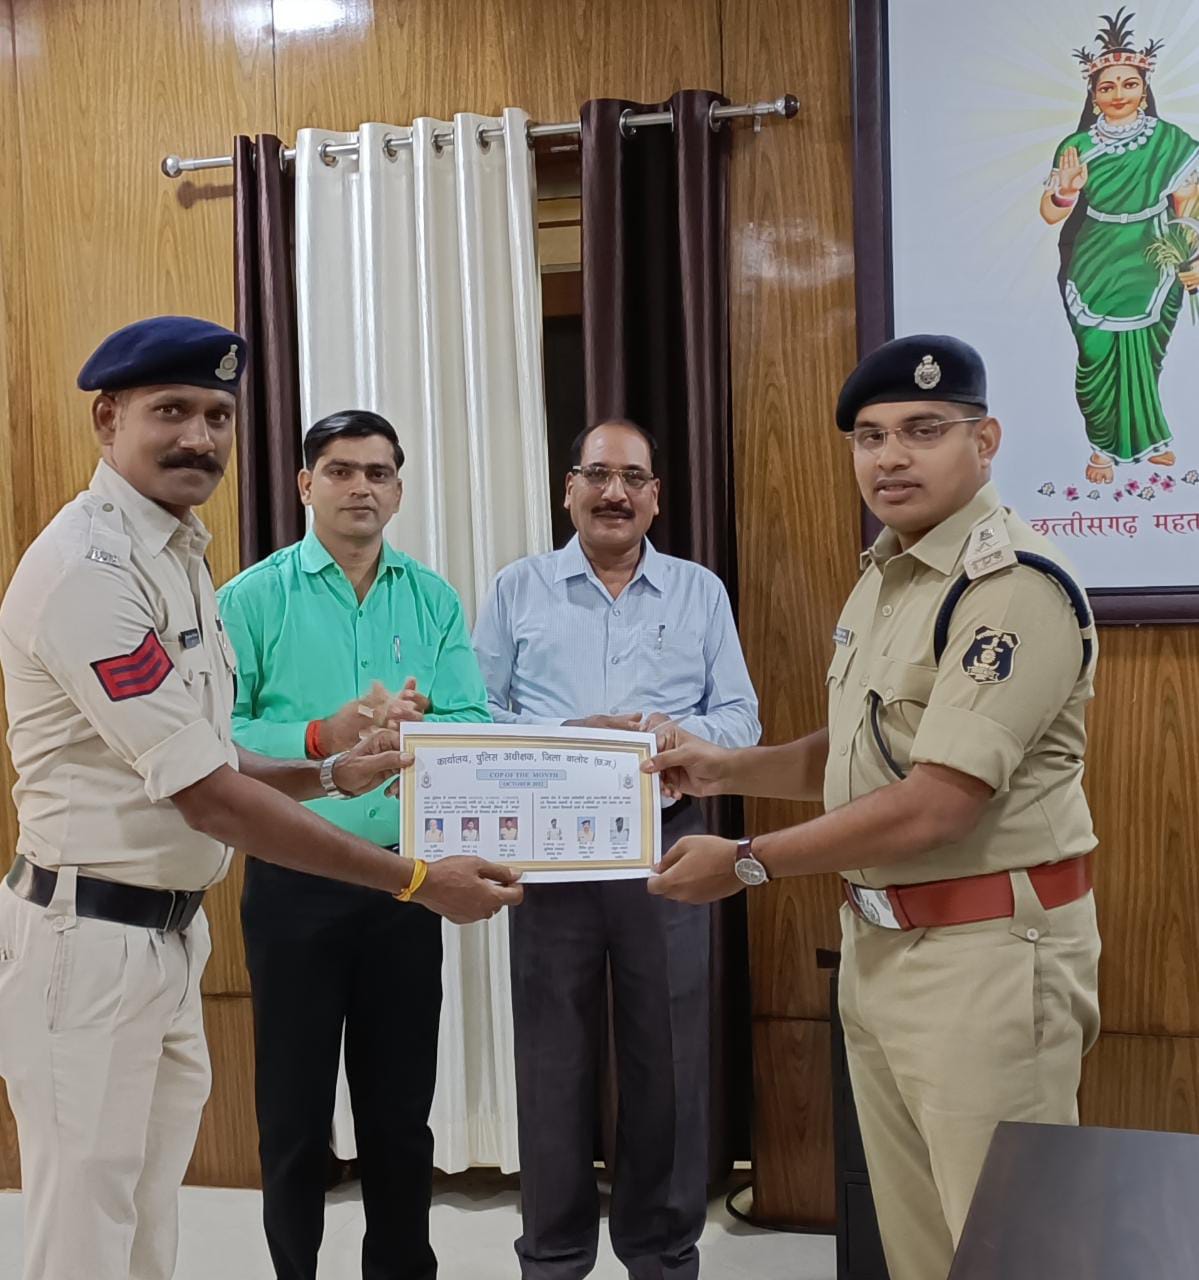 SP awarded Police Corp of the Month